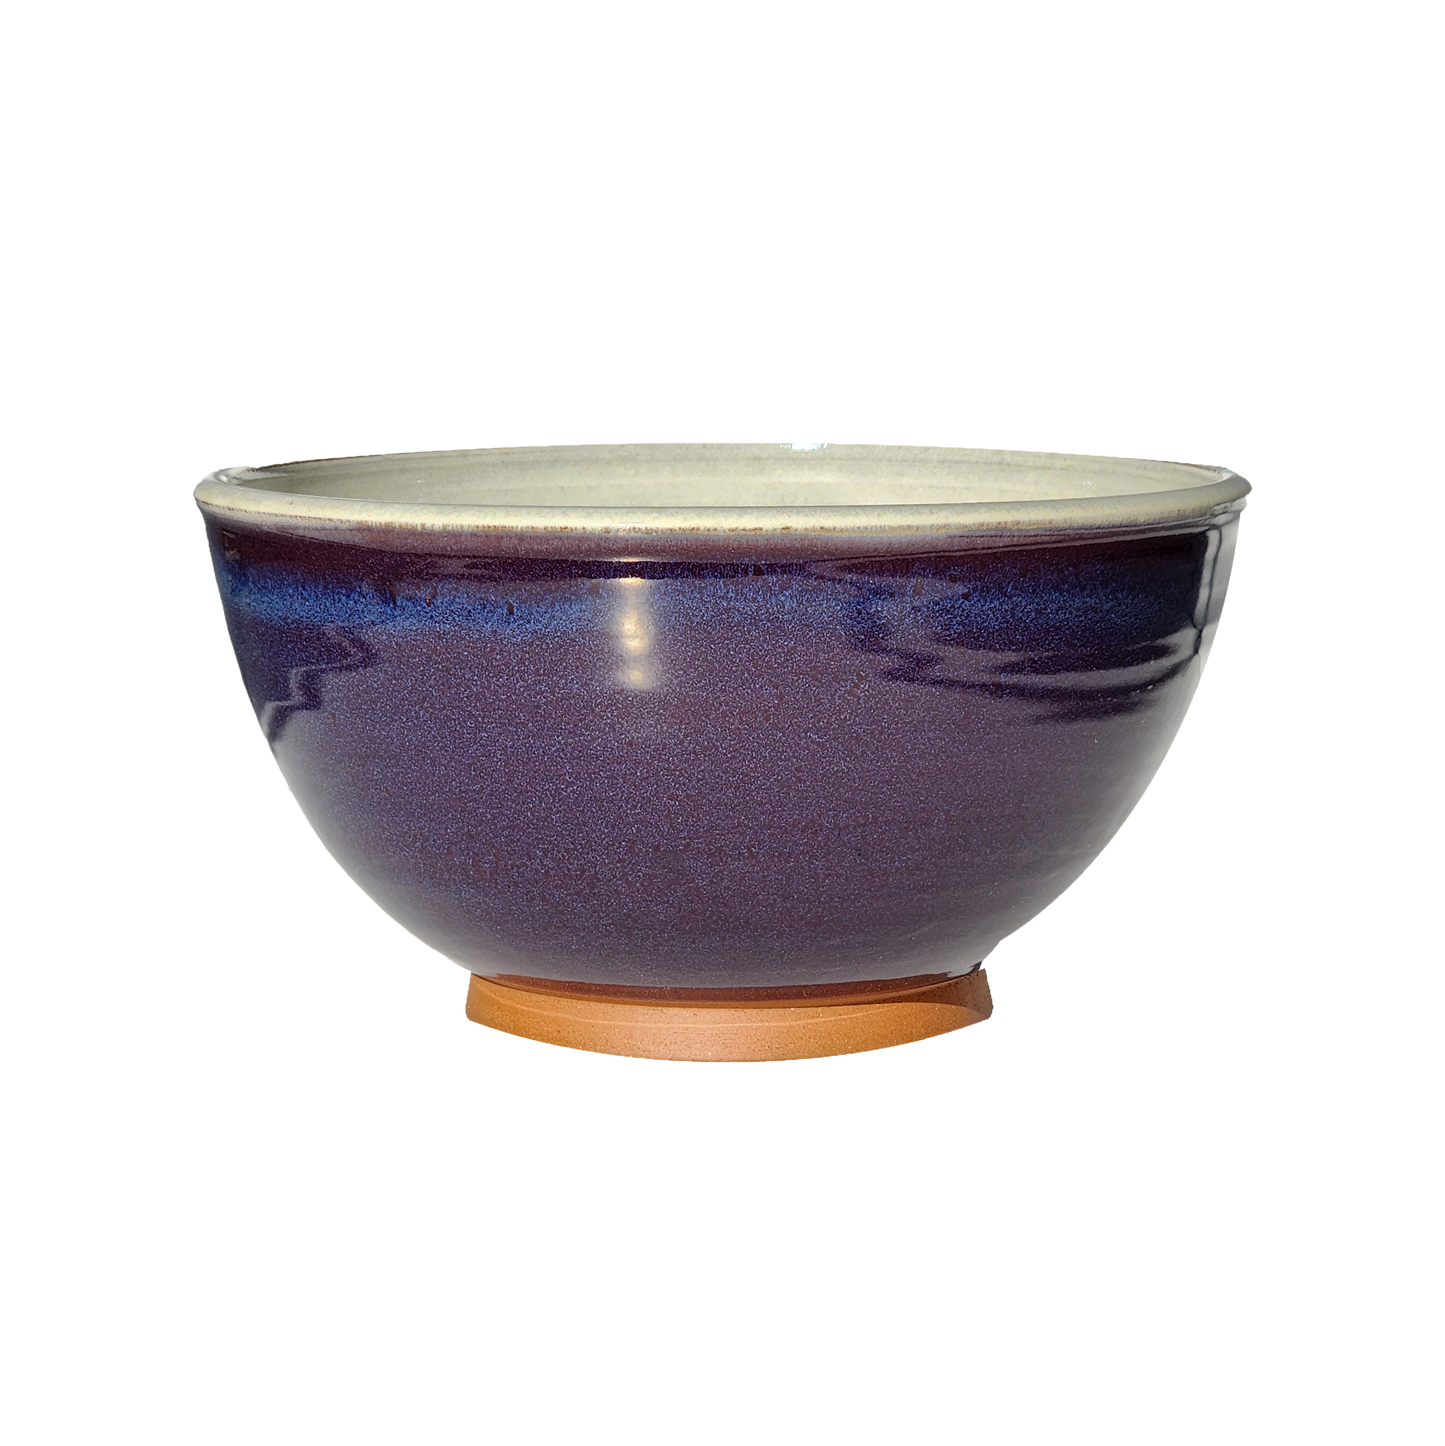 Image: A large mixing bowl in royal purple, offering generous space with a capacity of 12.5 cups. Make a bold statement in your kitchen with this regal and vibrant color.